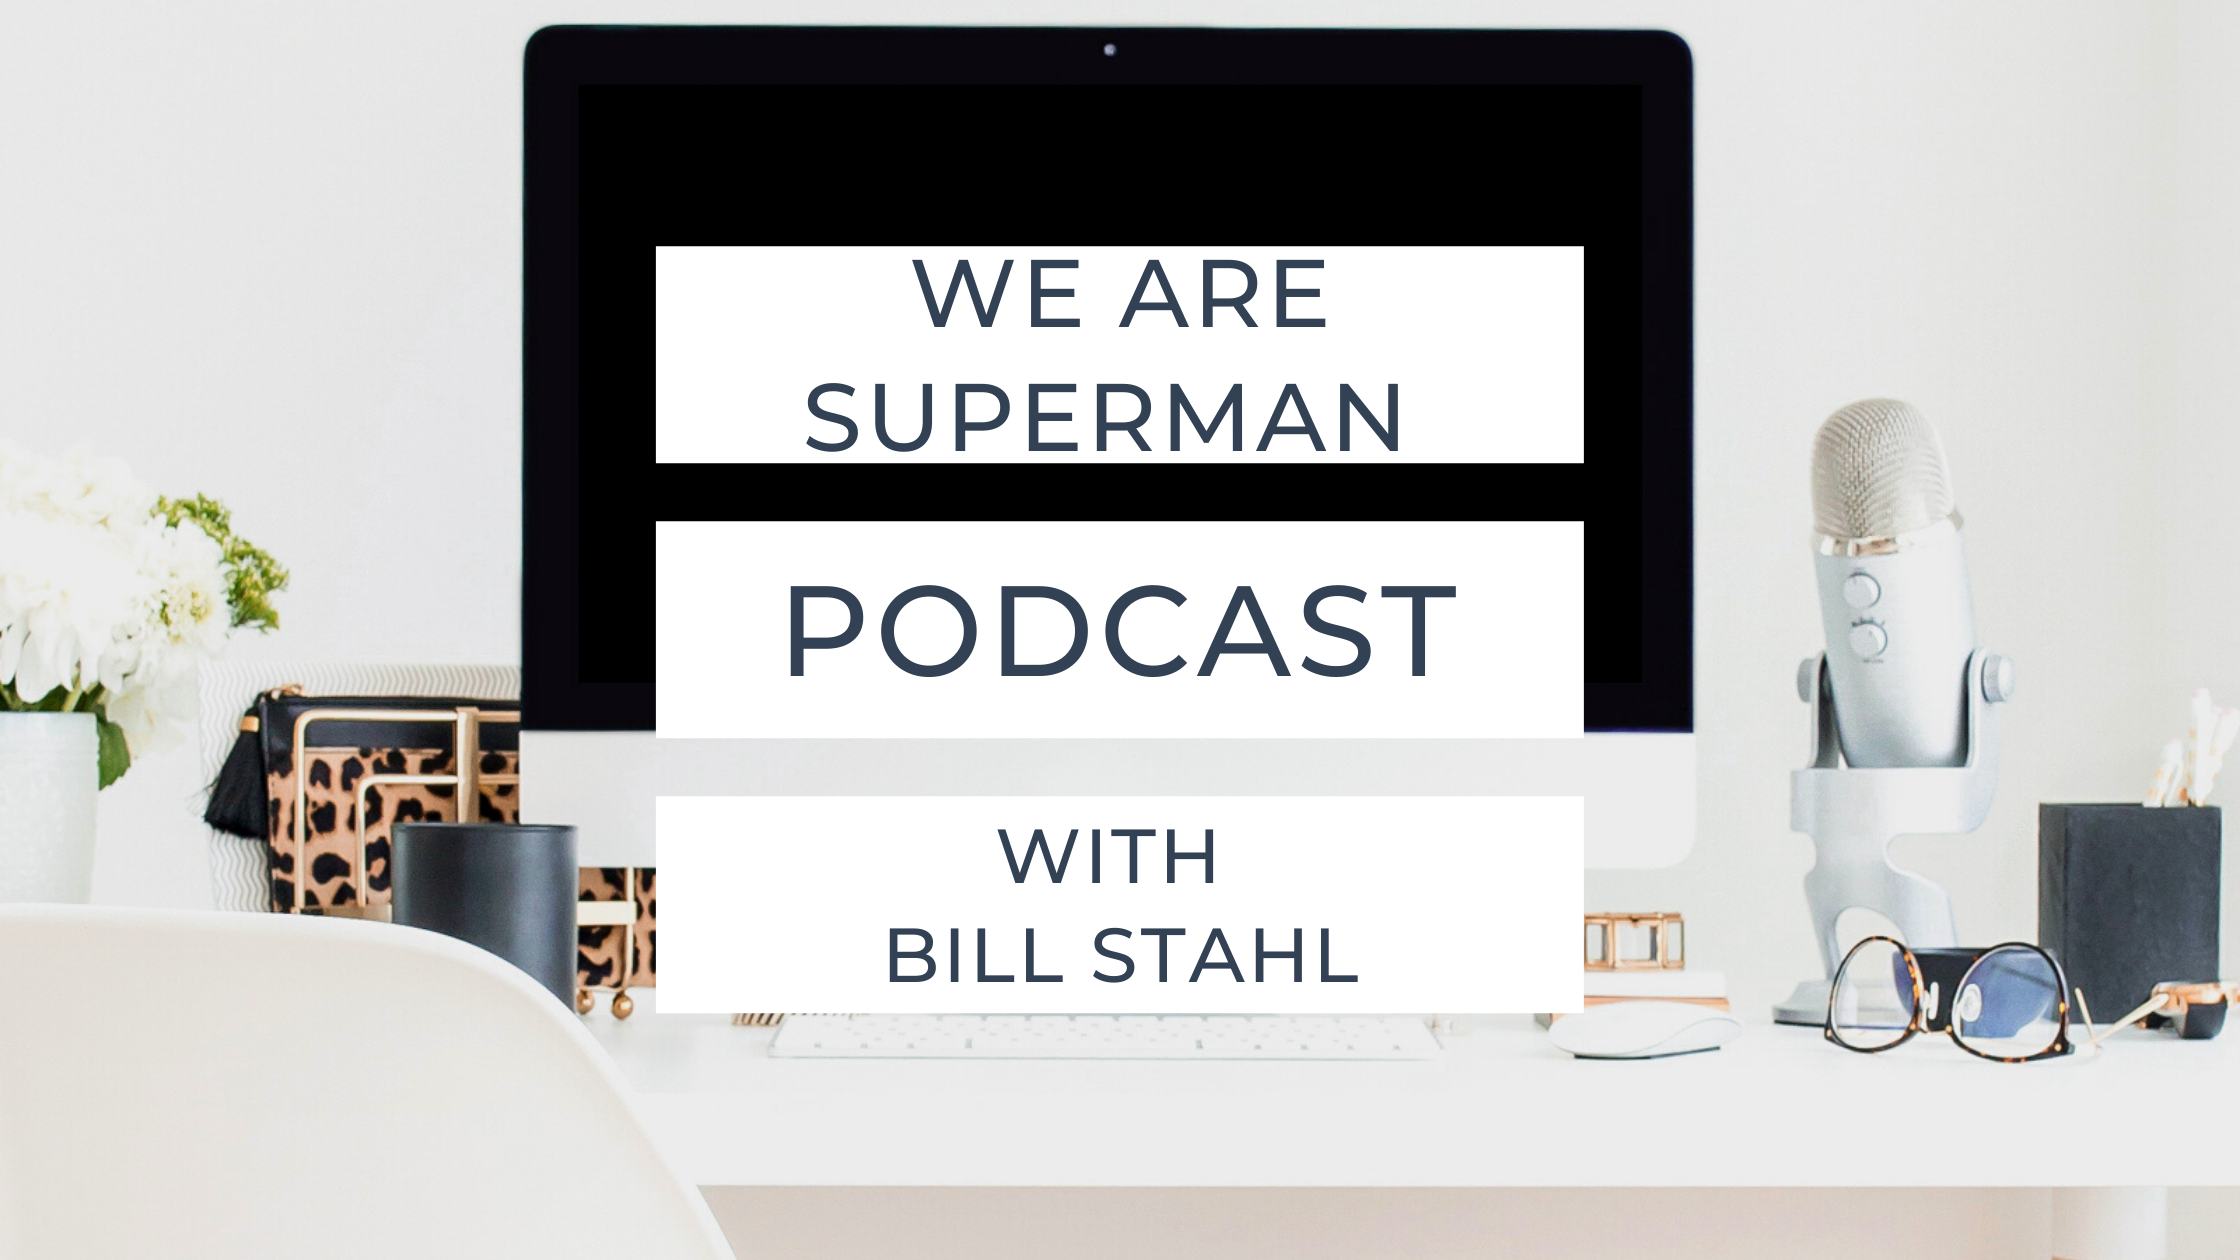 Computer with glasses and microphone wording reads We Are Superman Podcast with Bill Stahl